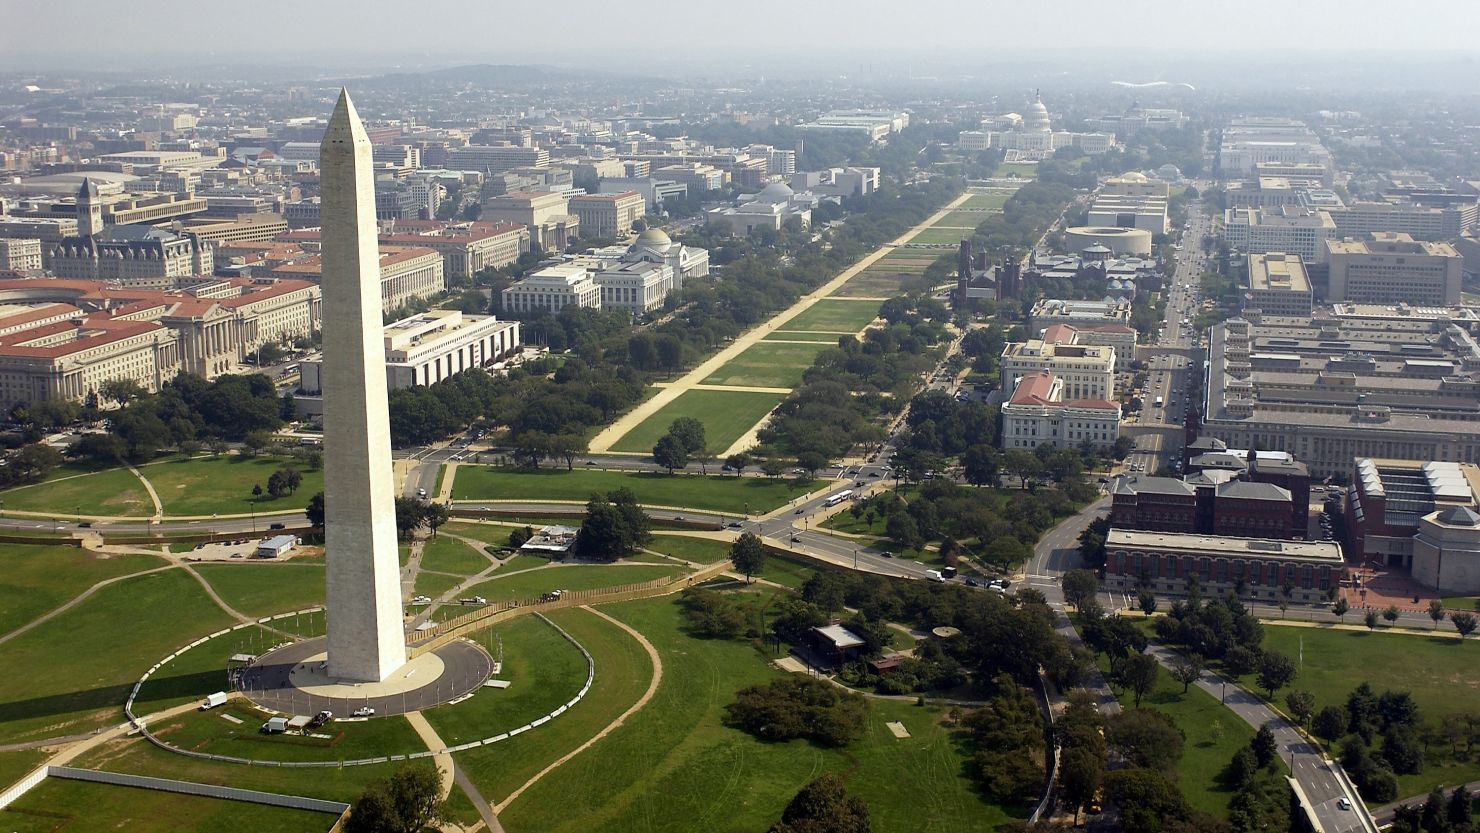 An aerial photo of the Washington Memorial with the Capitol in the background in Washington, DC, on September 26, 2003.